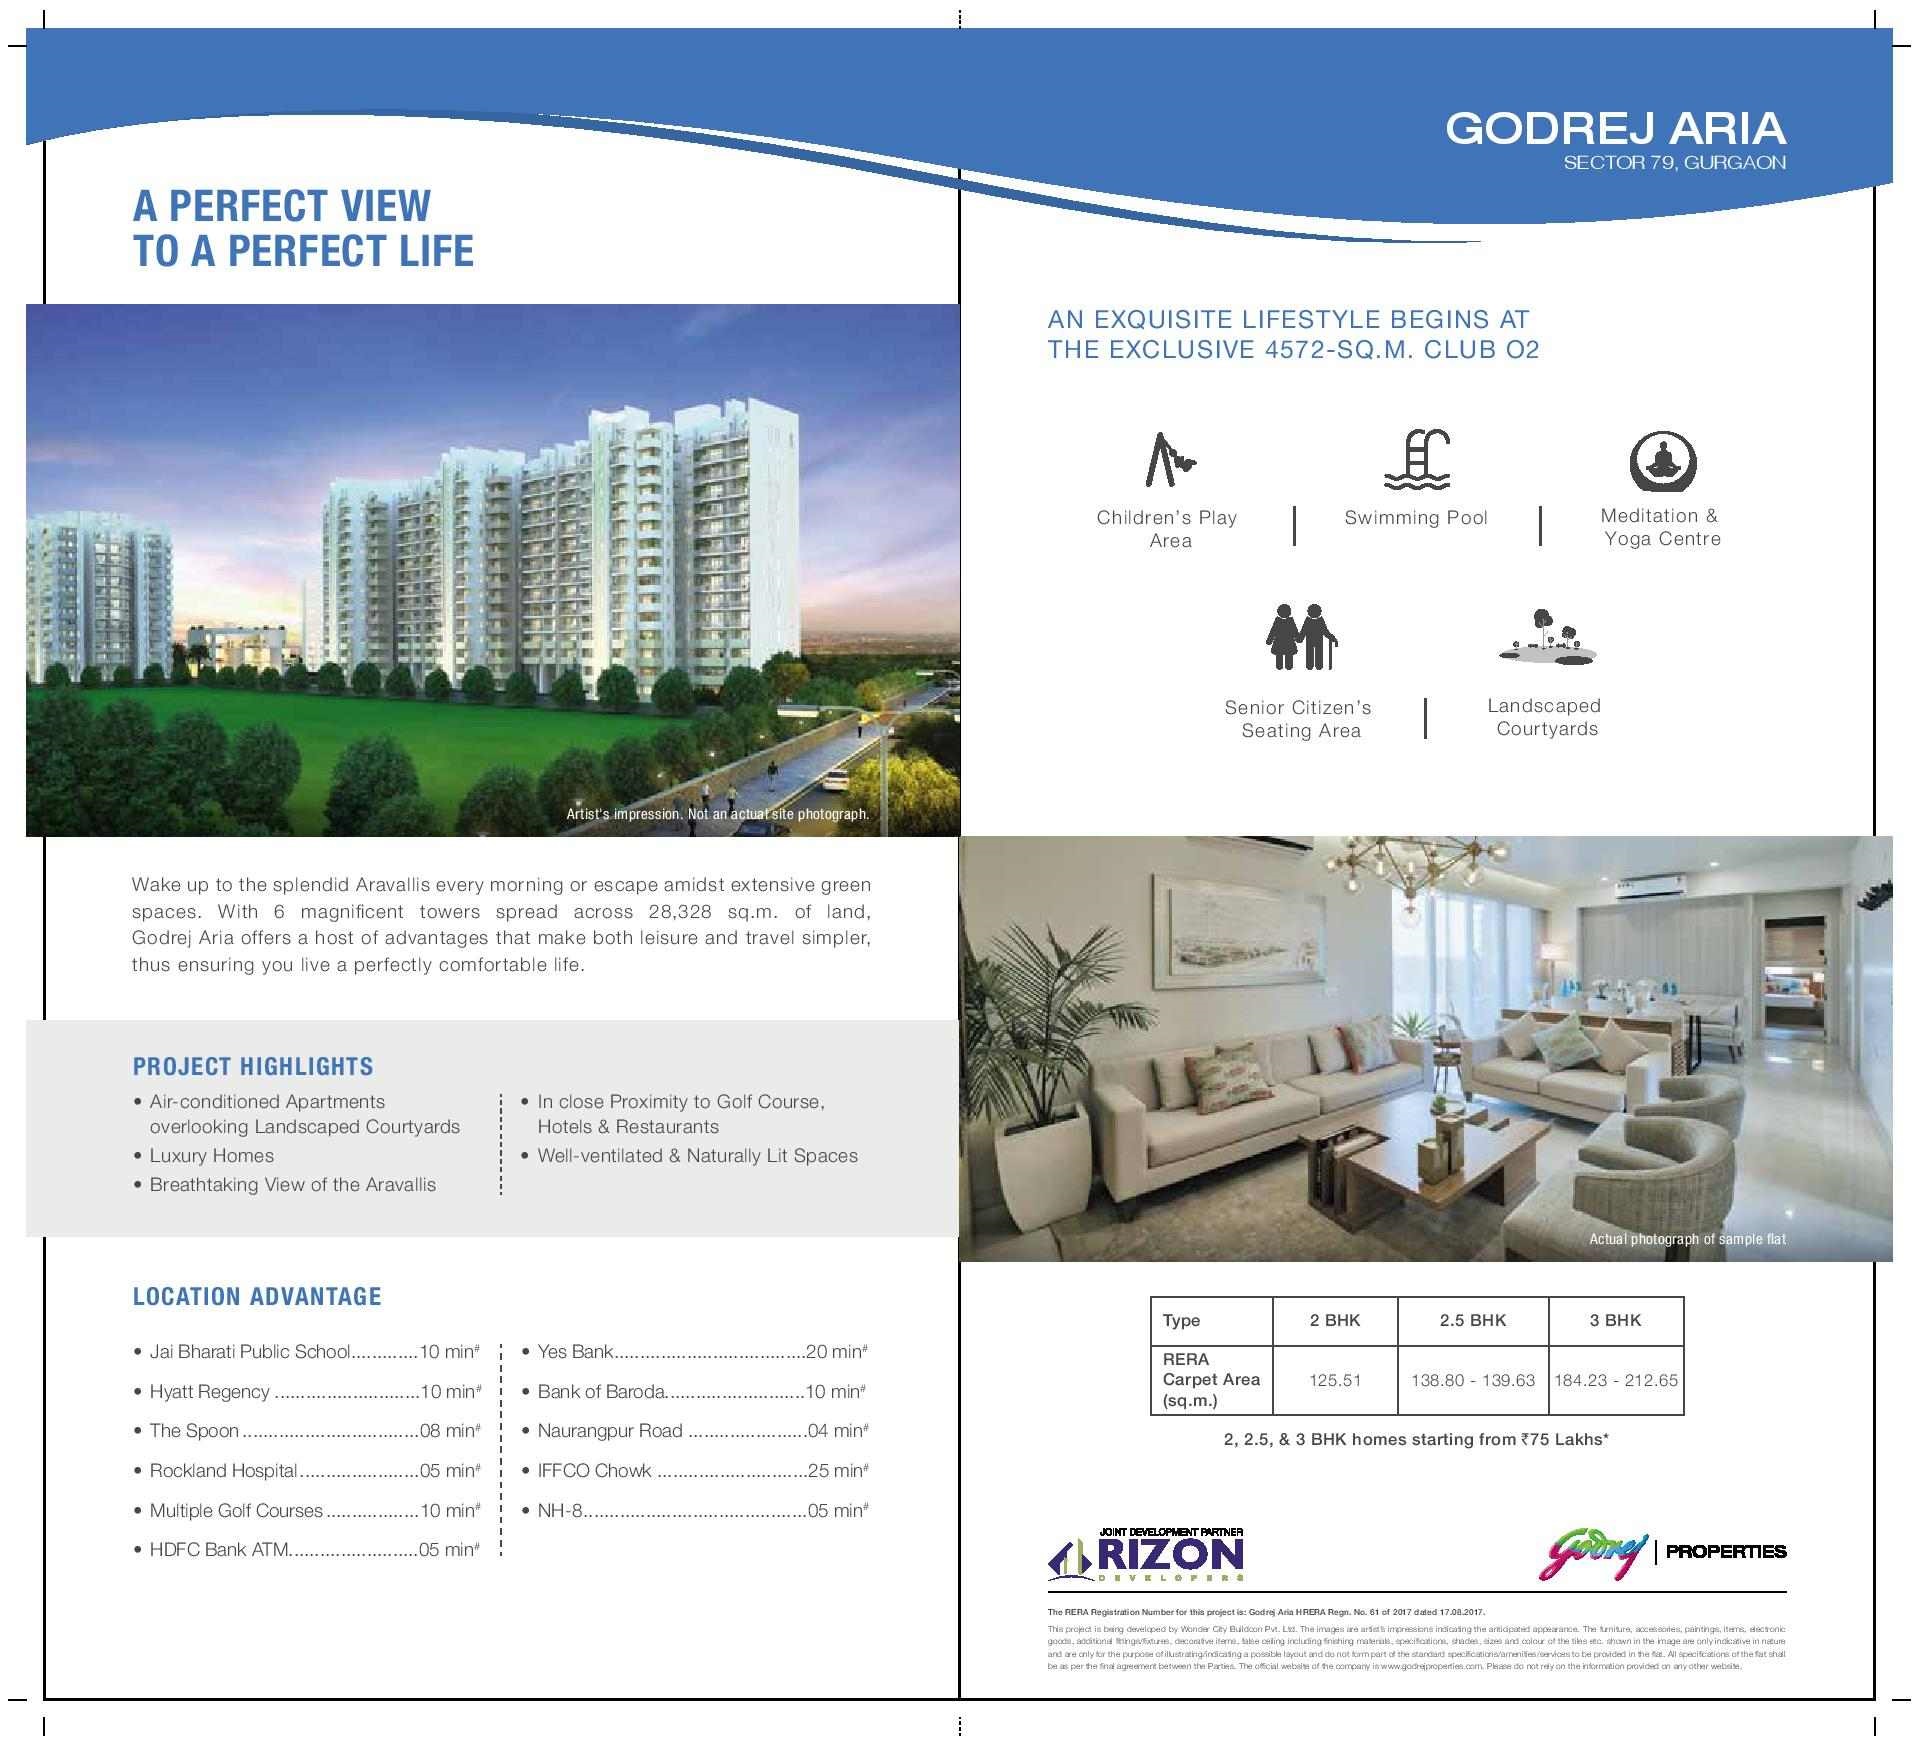 Own a home at Rs.9999 per month with Happy EMI at Godrej Aria in Gurgaon